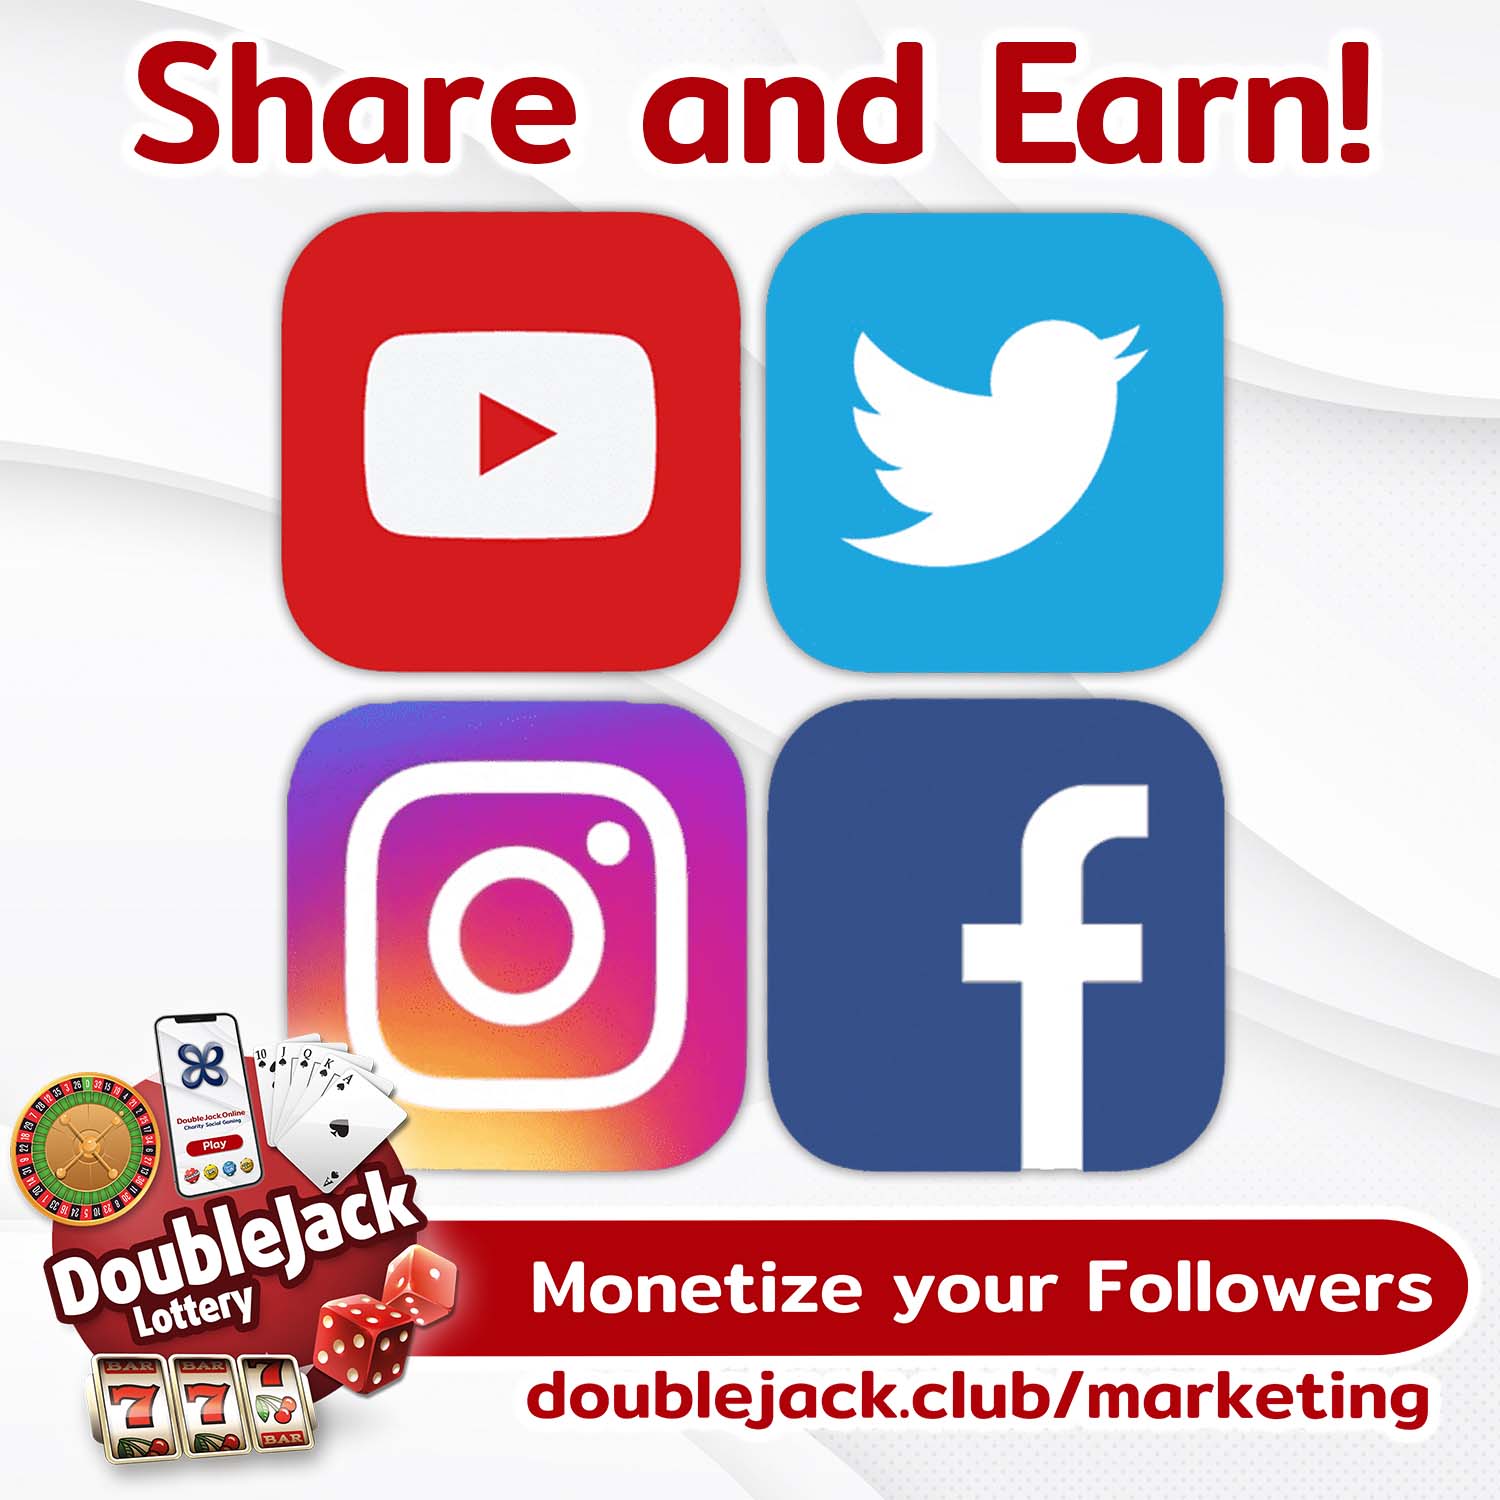 Share the doublejack story on social media - with your link